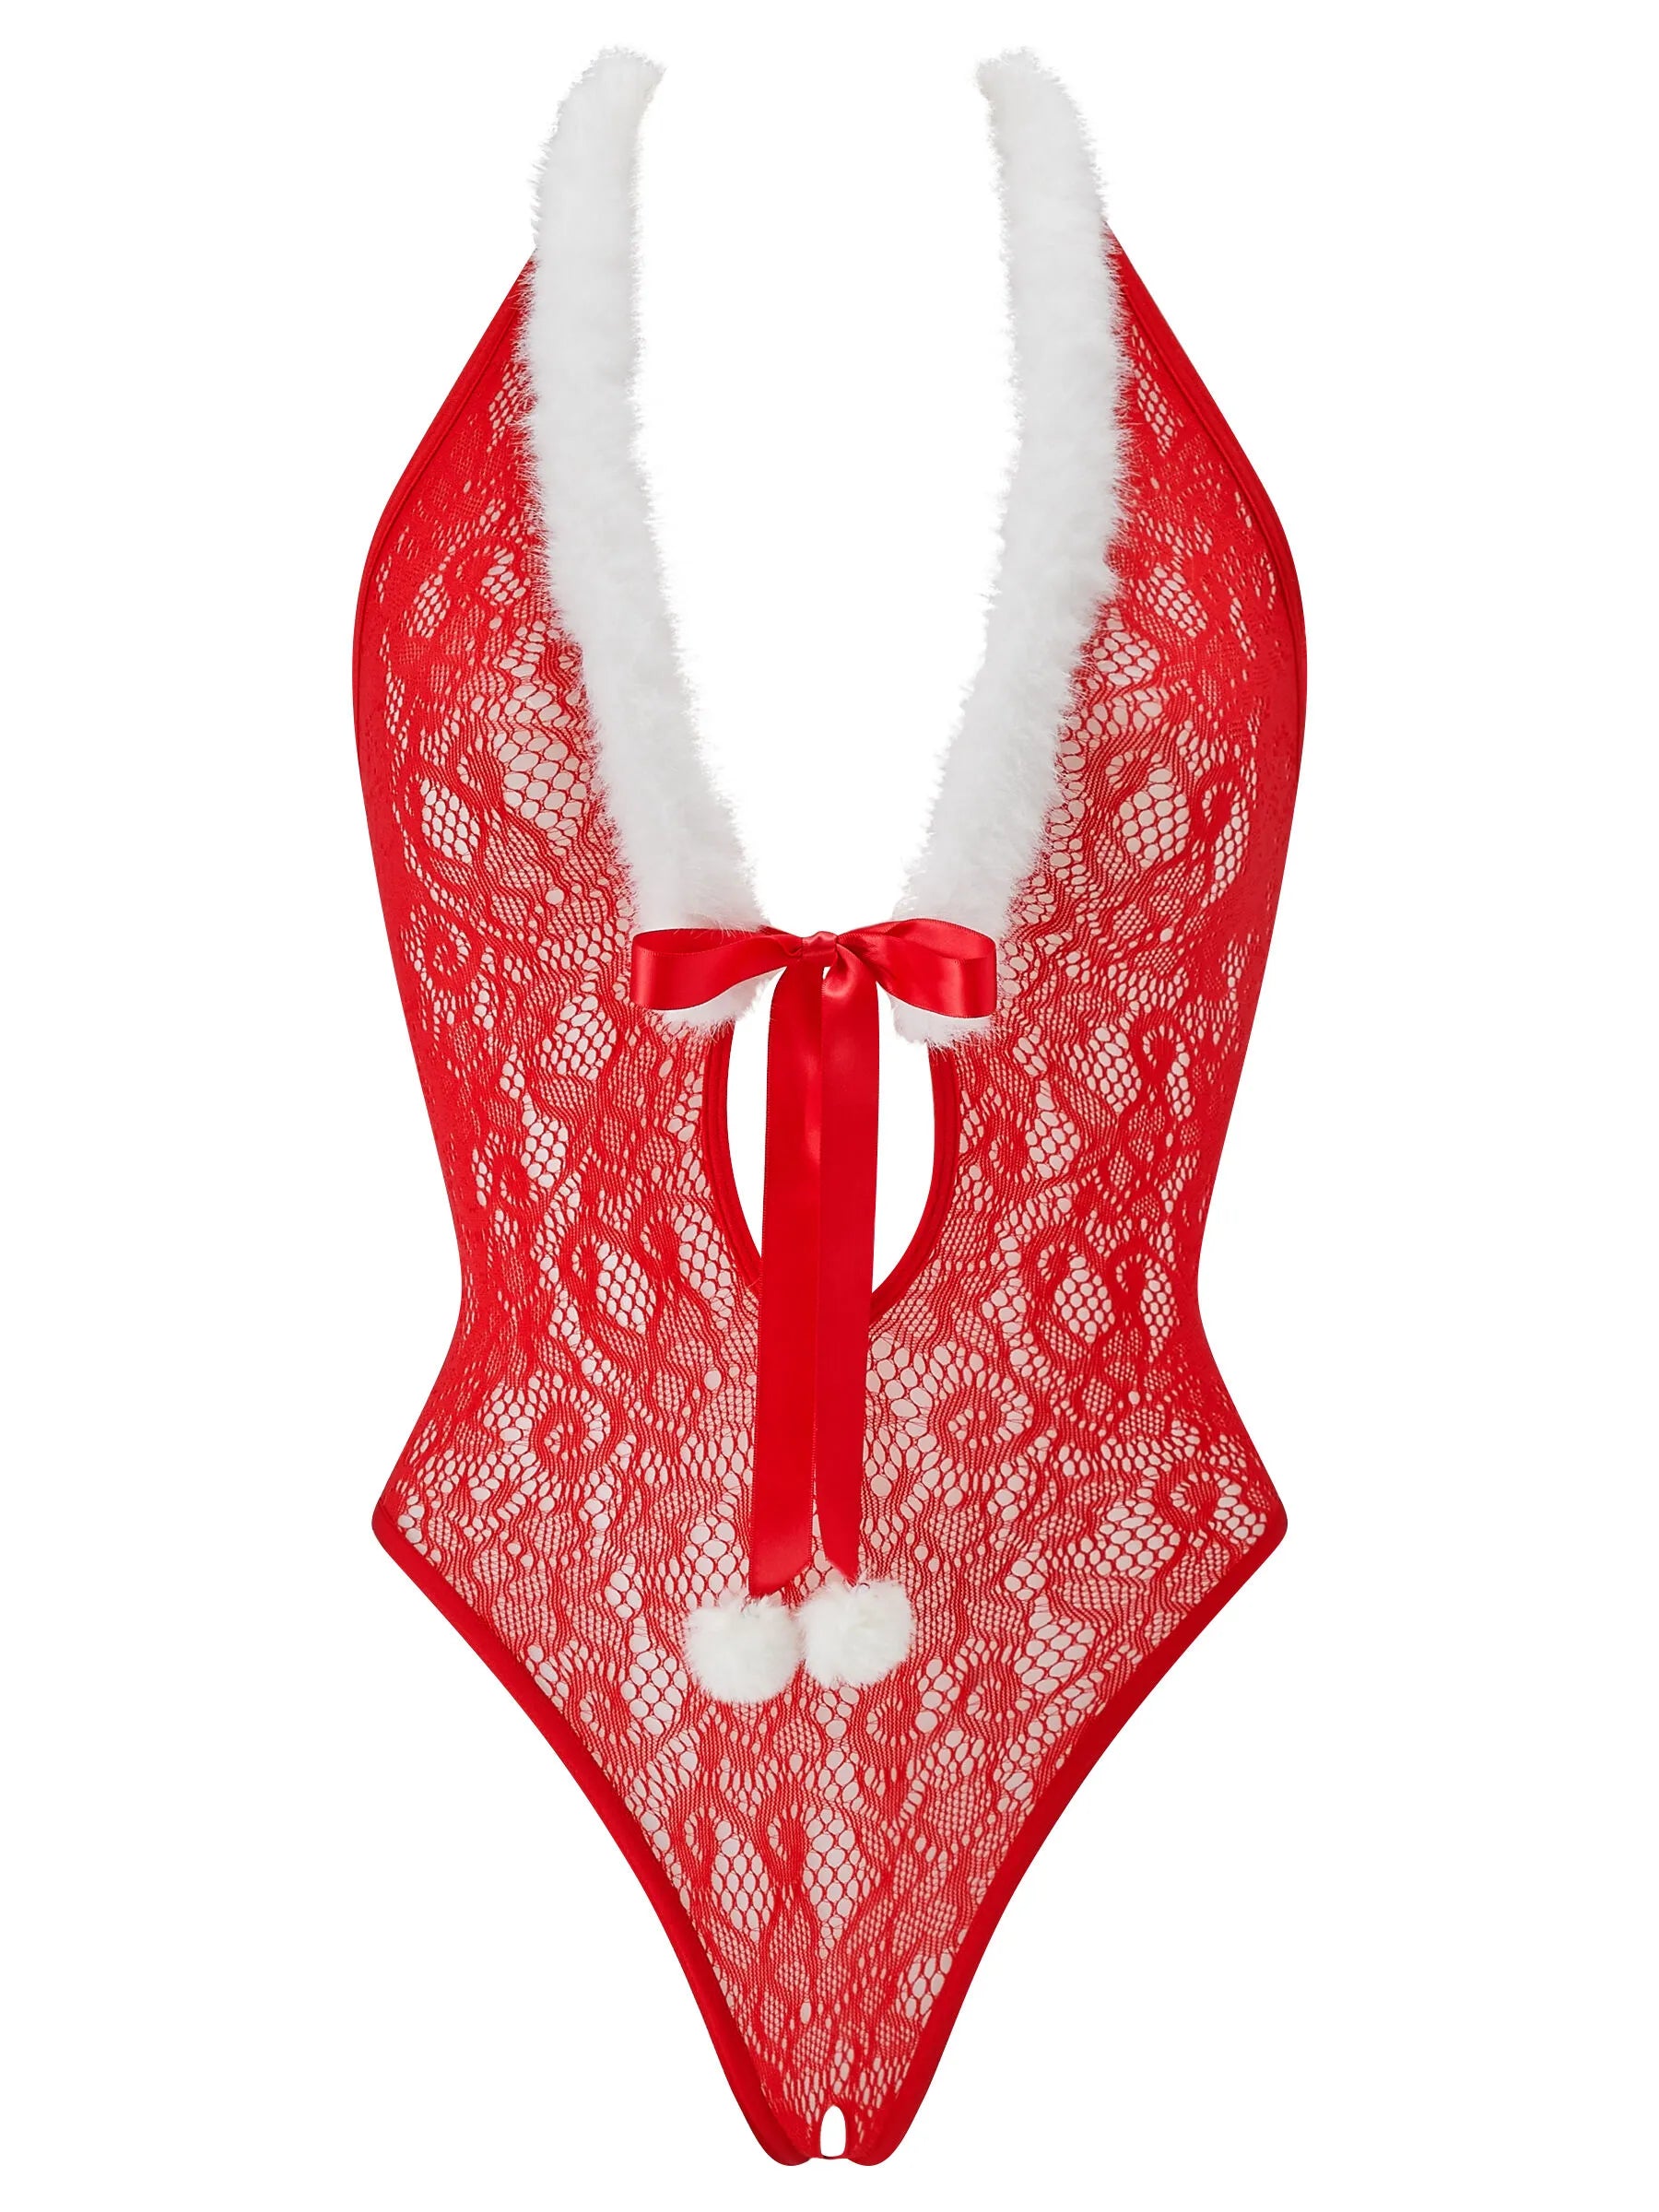 Winter Wonderland Crotchless Body From Ann Summers, Image 03